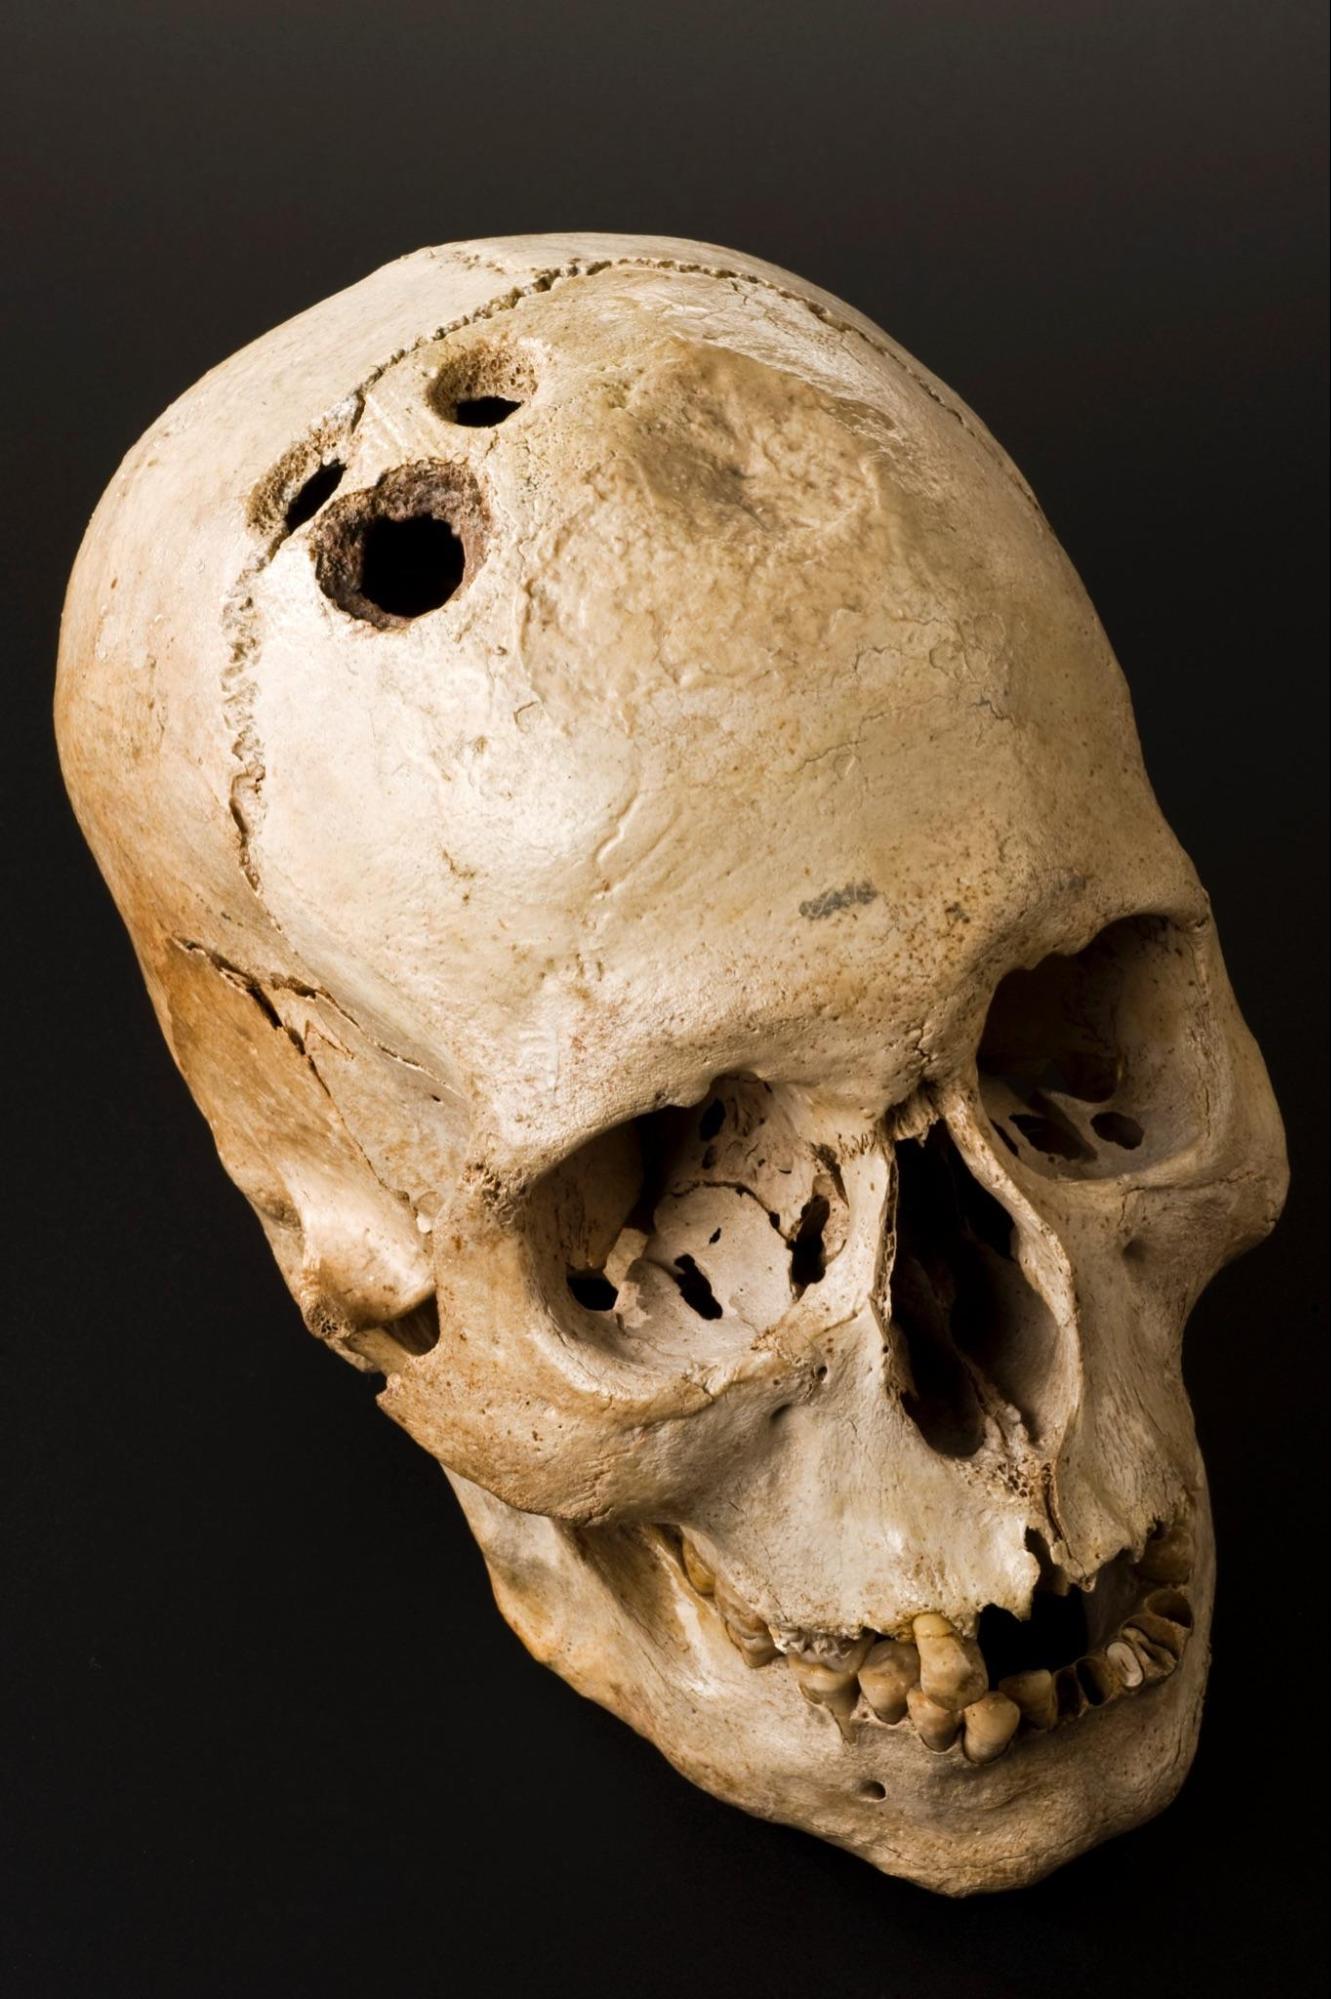 A trephined skull with 3 holes on the top.